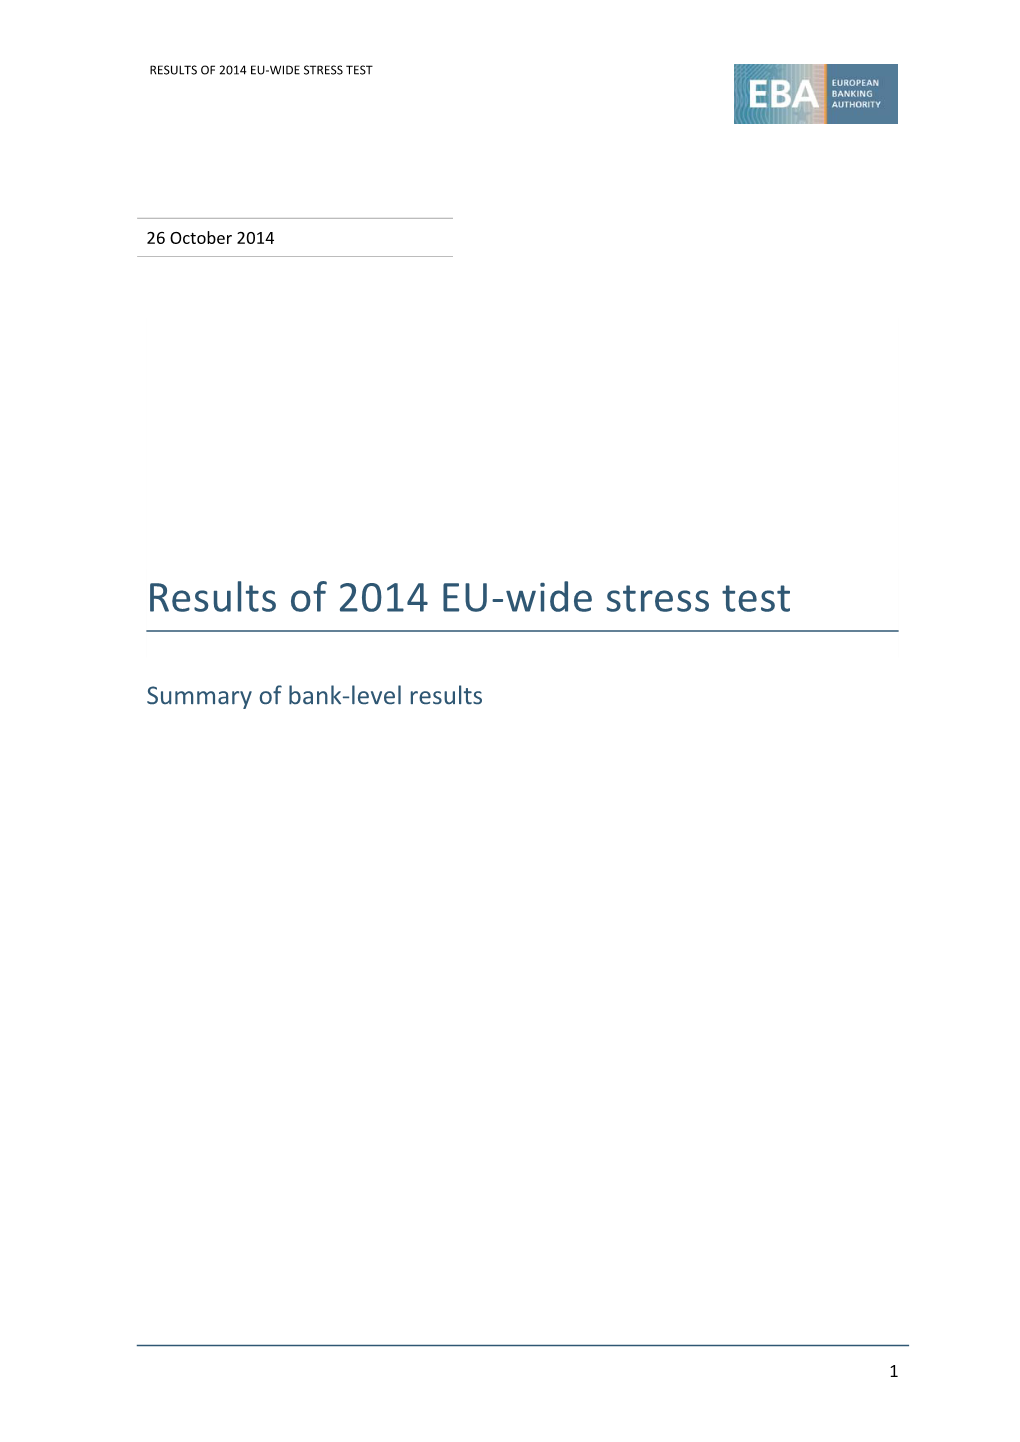 Results of 2014 EU-Wide Stress Test